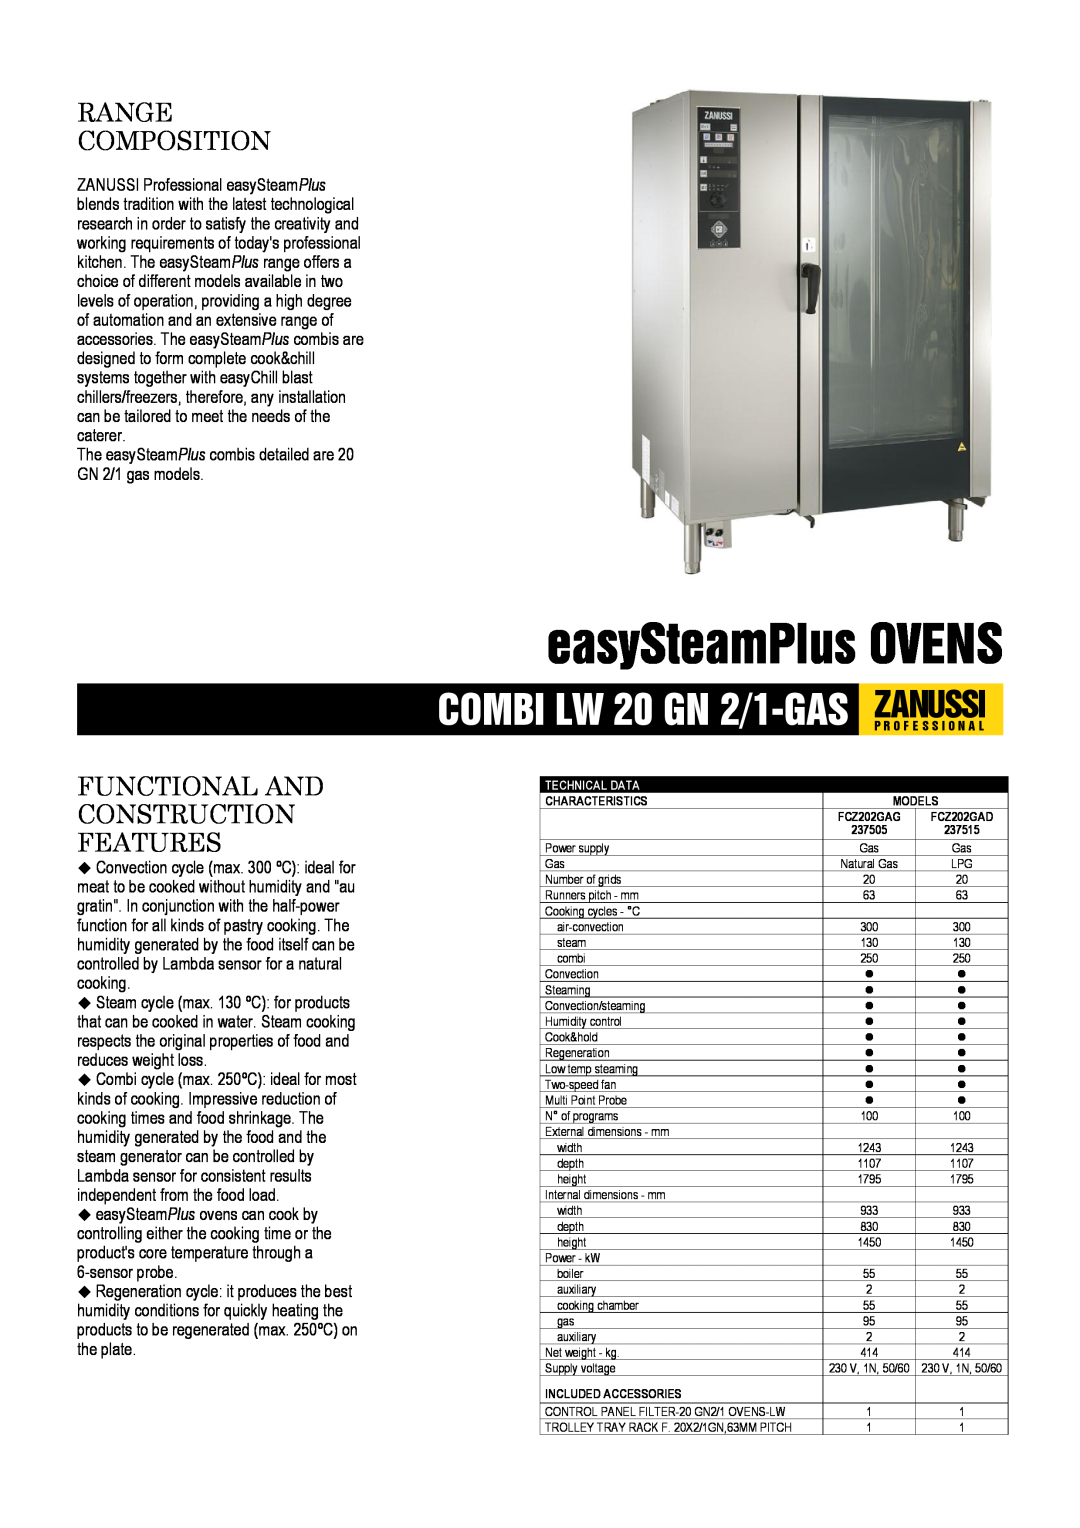 Zanussi FCZ202GAD, FCZ202GAG dimensions easySteamPlus OVENS, Range Composition, Functional And Construction Features 